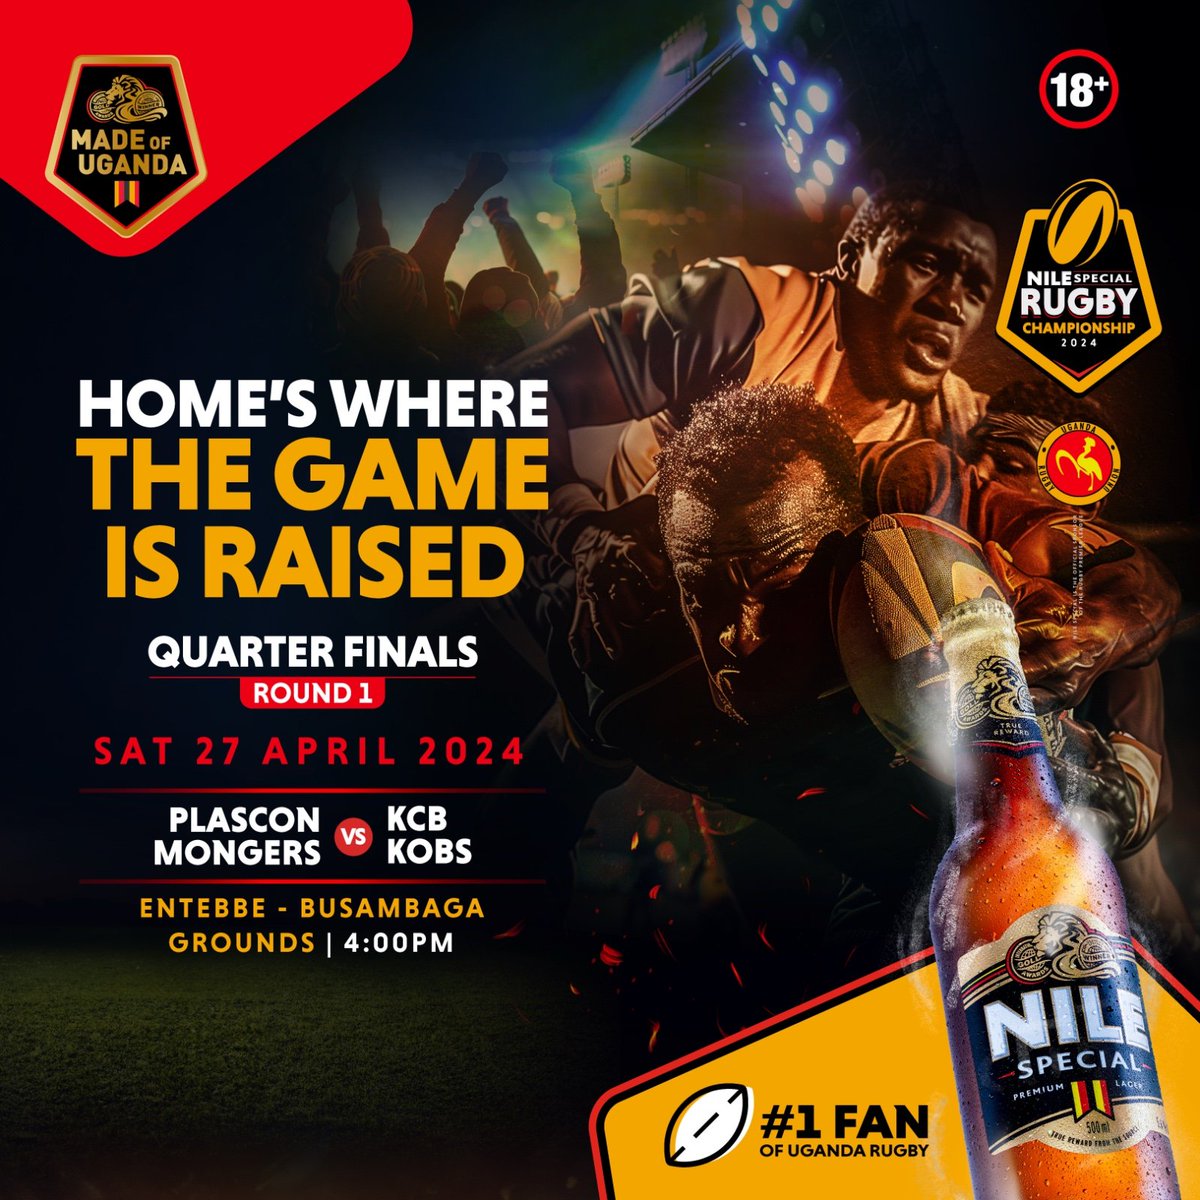 With 4 Exciting Quarter Final Games on card this Saturday, it is now upon each Outfit's fans to raise their game at this stage. Will you head for: -Scary hours as Walukuba finds footing against Regular season dominants Heathen. -Will it be Hippos against Buffaloes' sample of